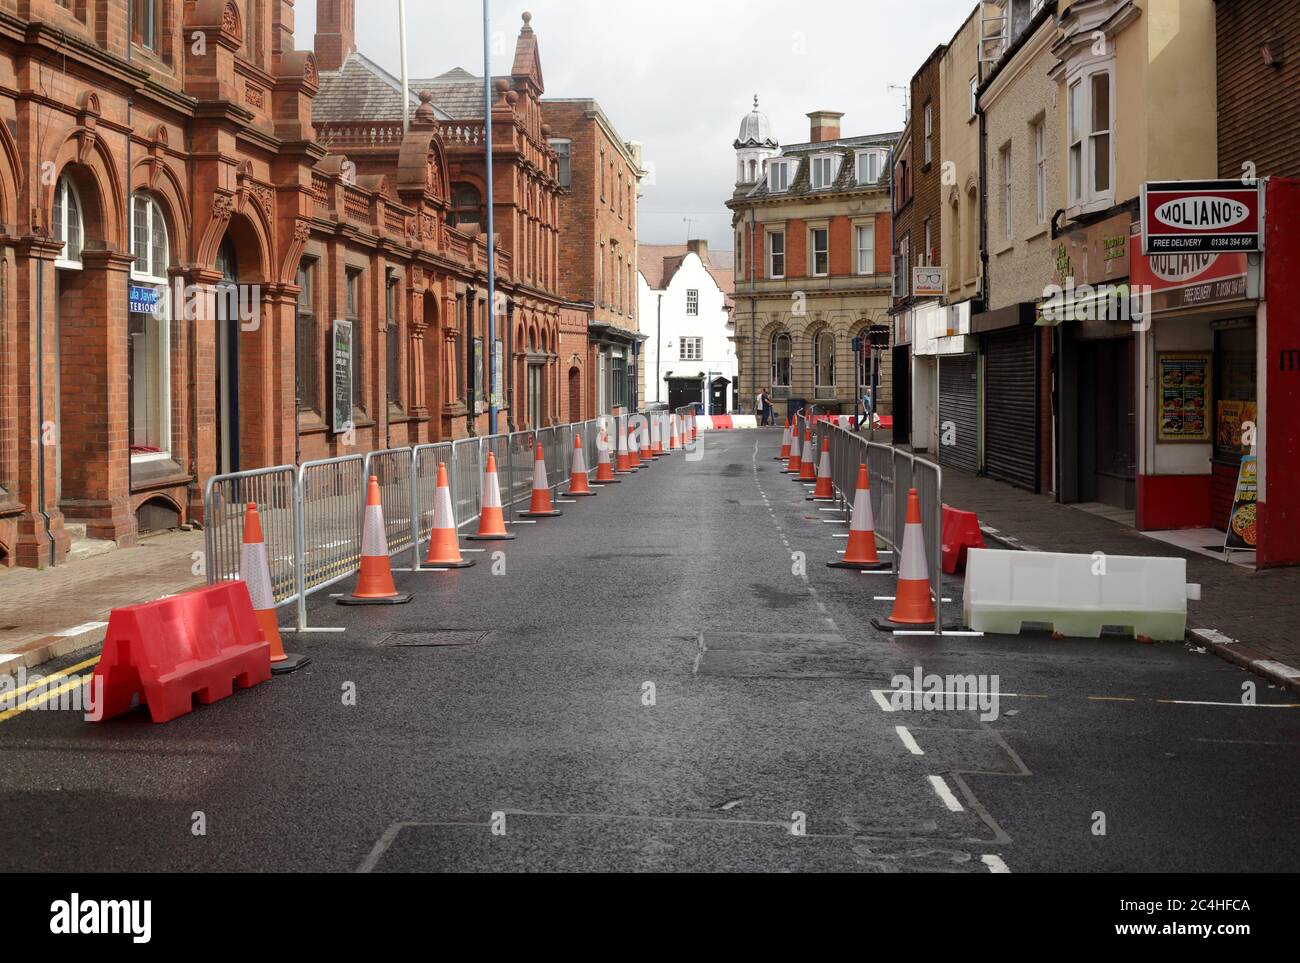 Barriers erected in Stourbridge town centre to allow for social distancing for pedestrians. Stock Photo